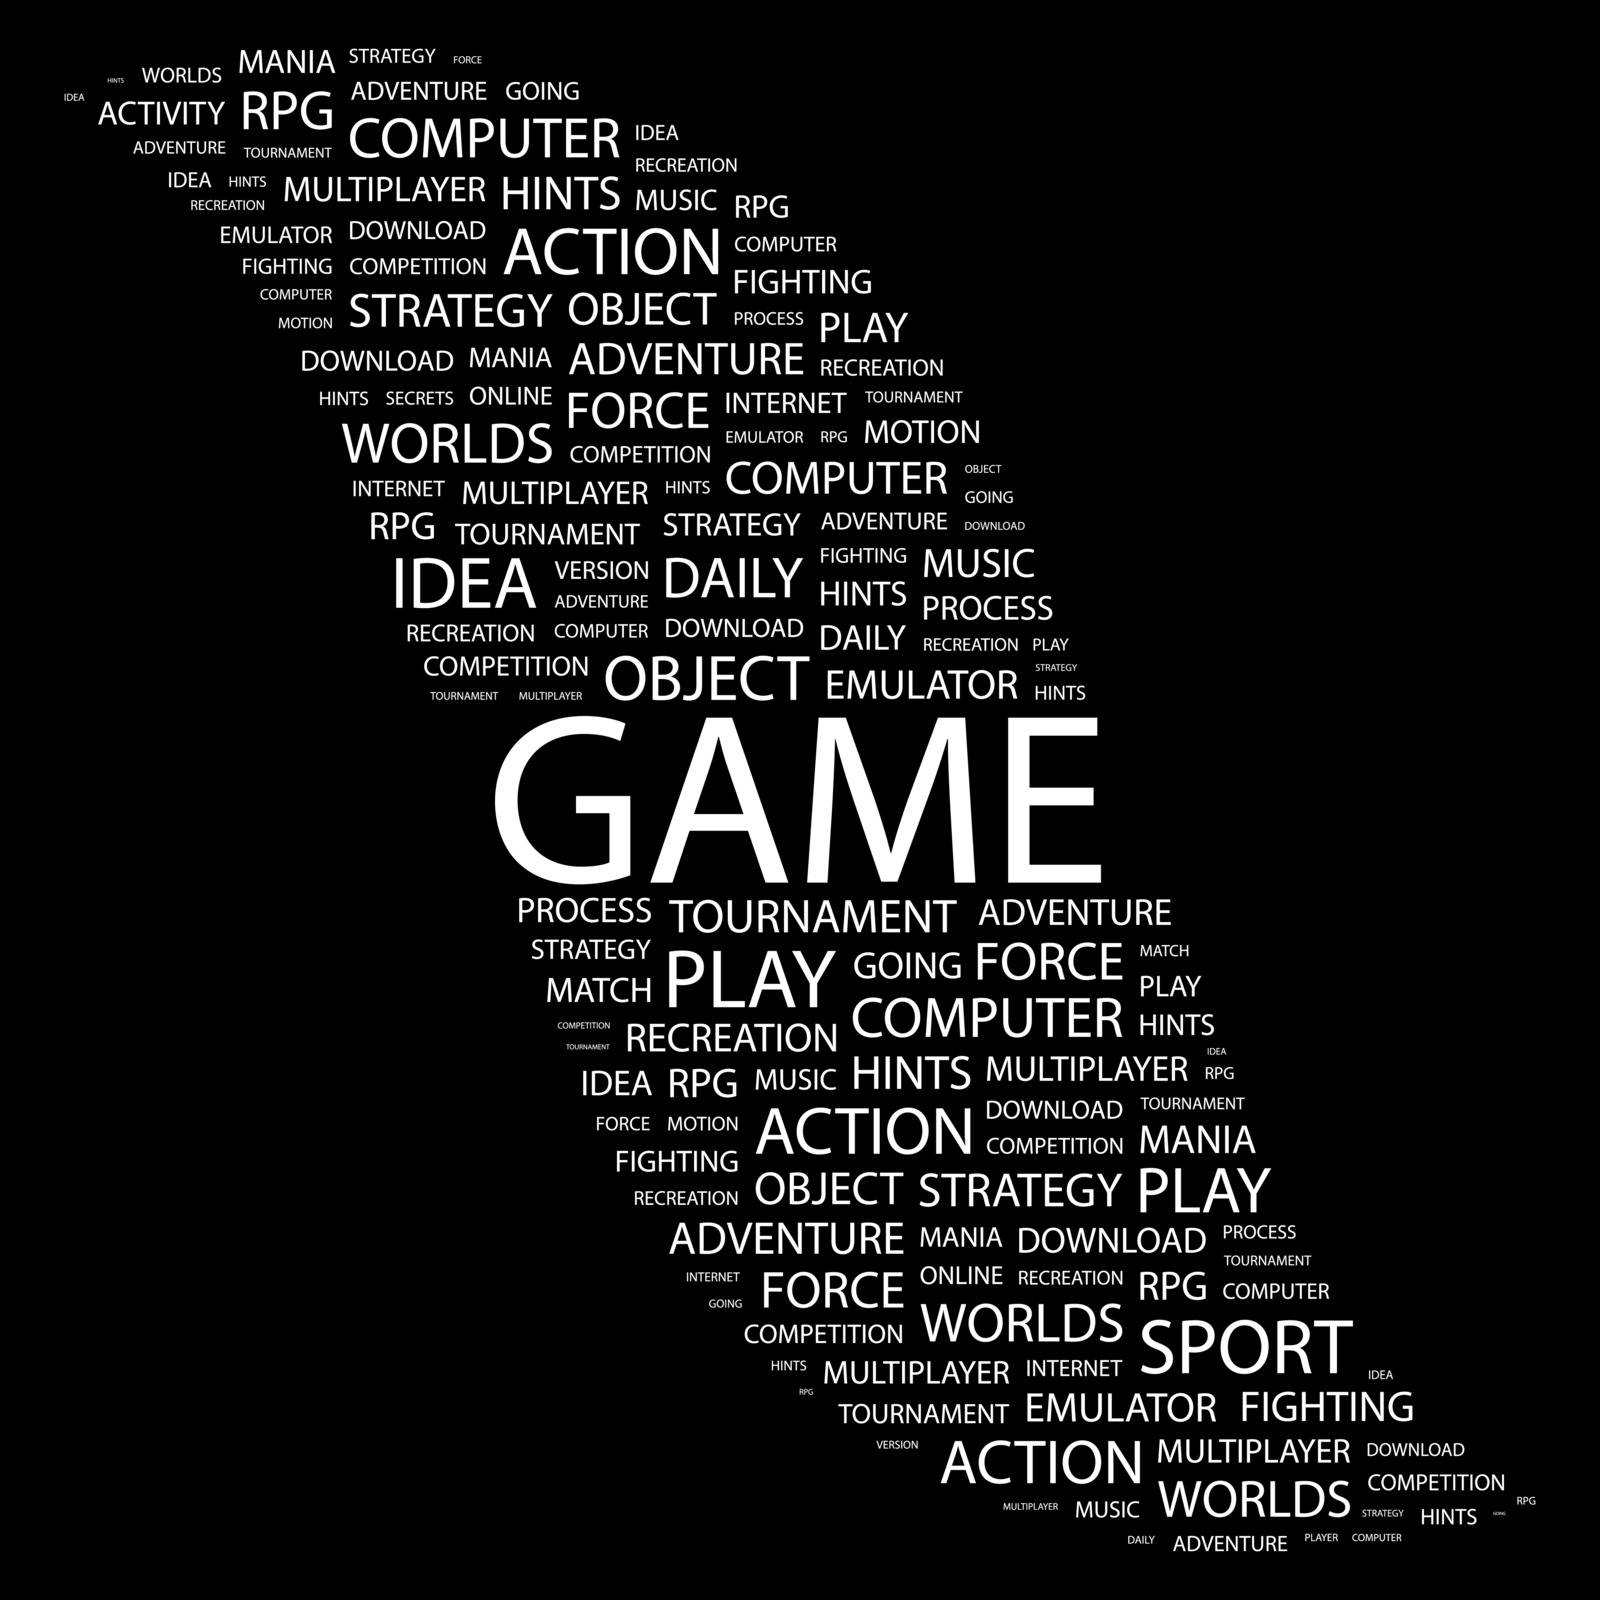 GAME. by login